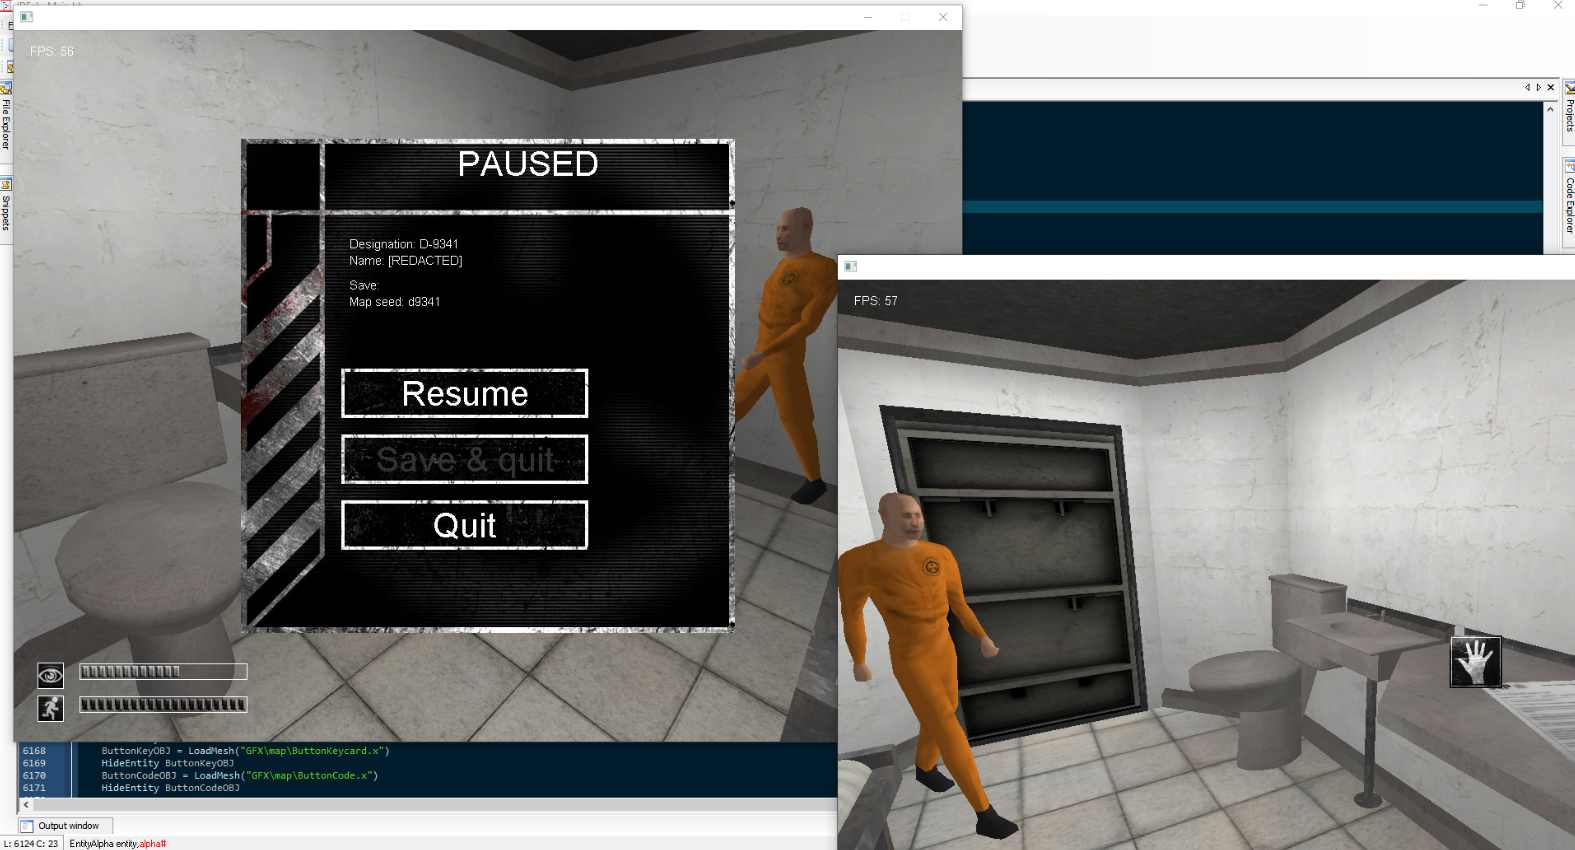 scpmp 1 image - SCP - Containment Breach Multiplayer Mod - Mod DB